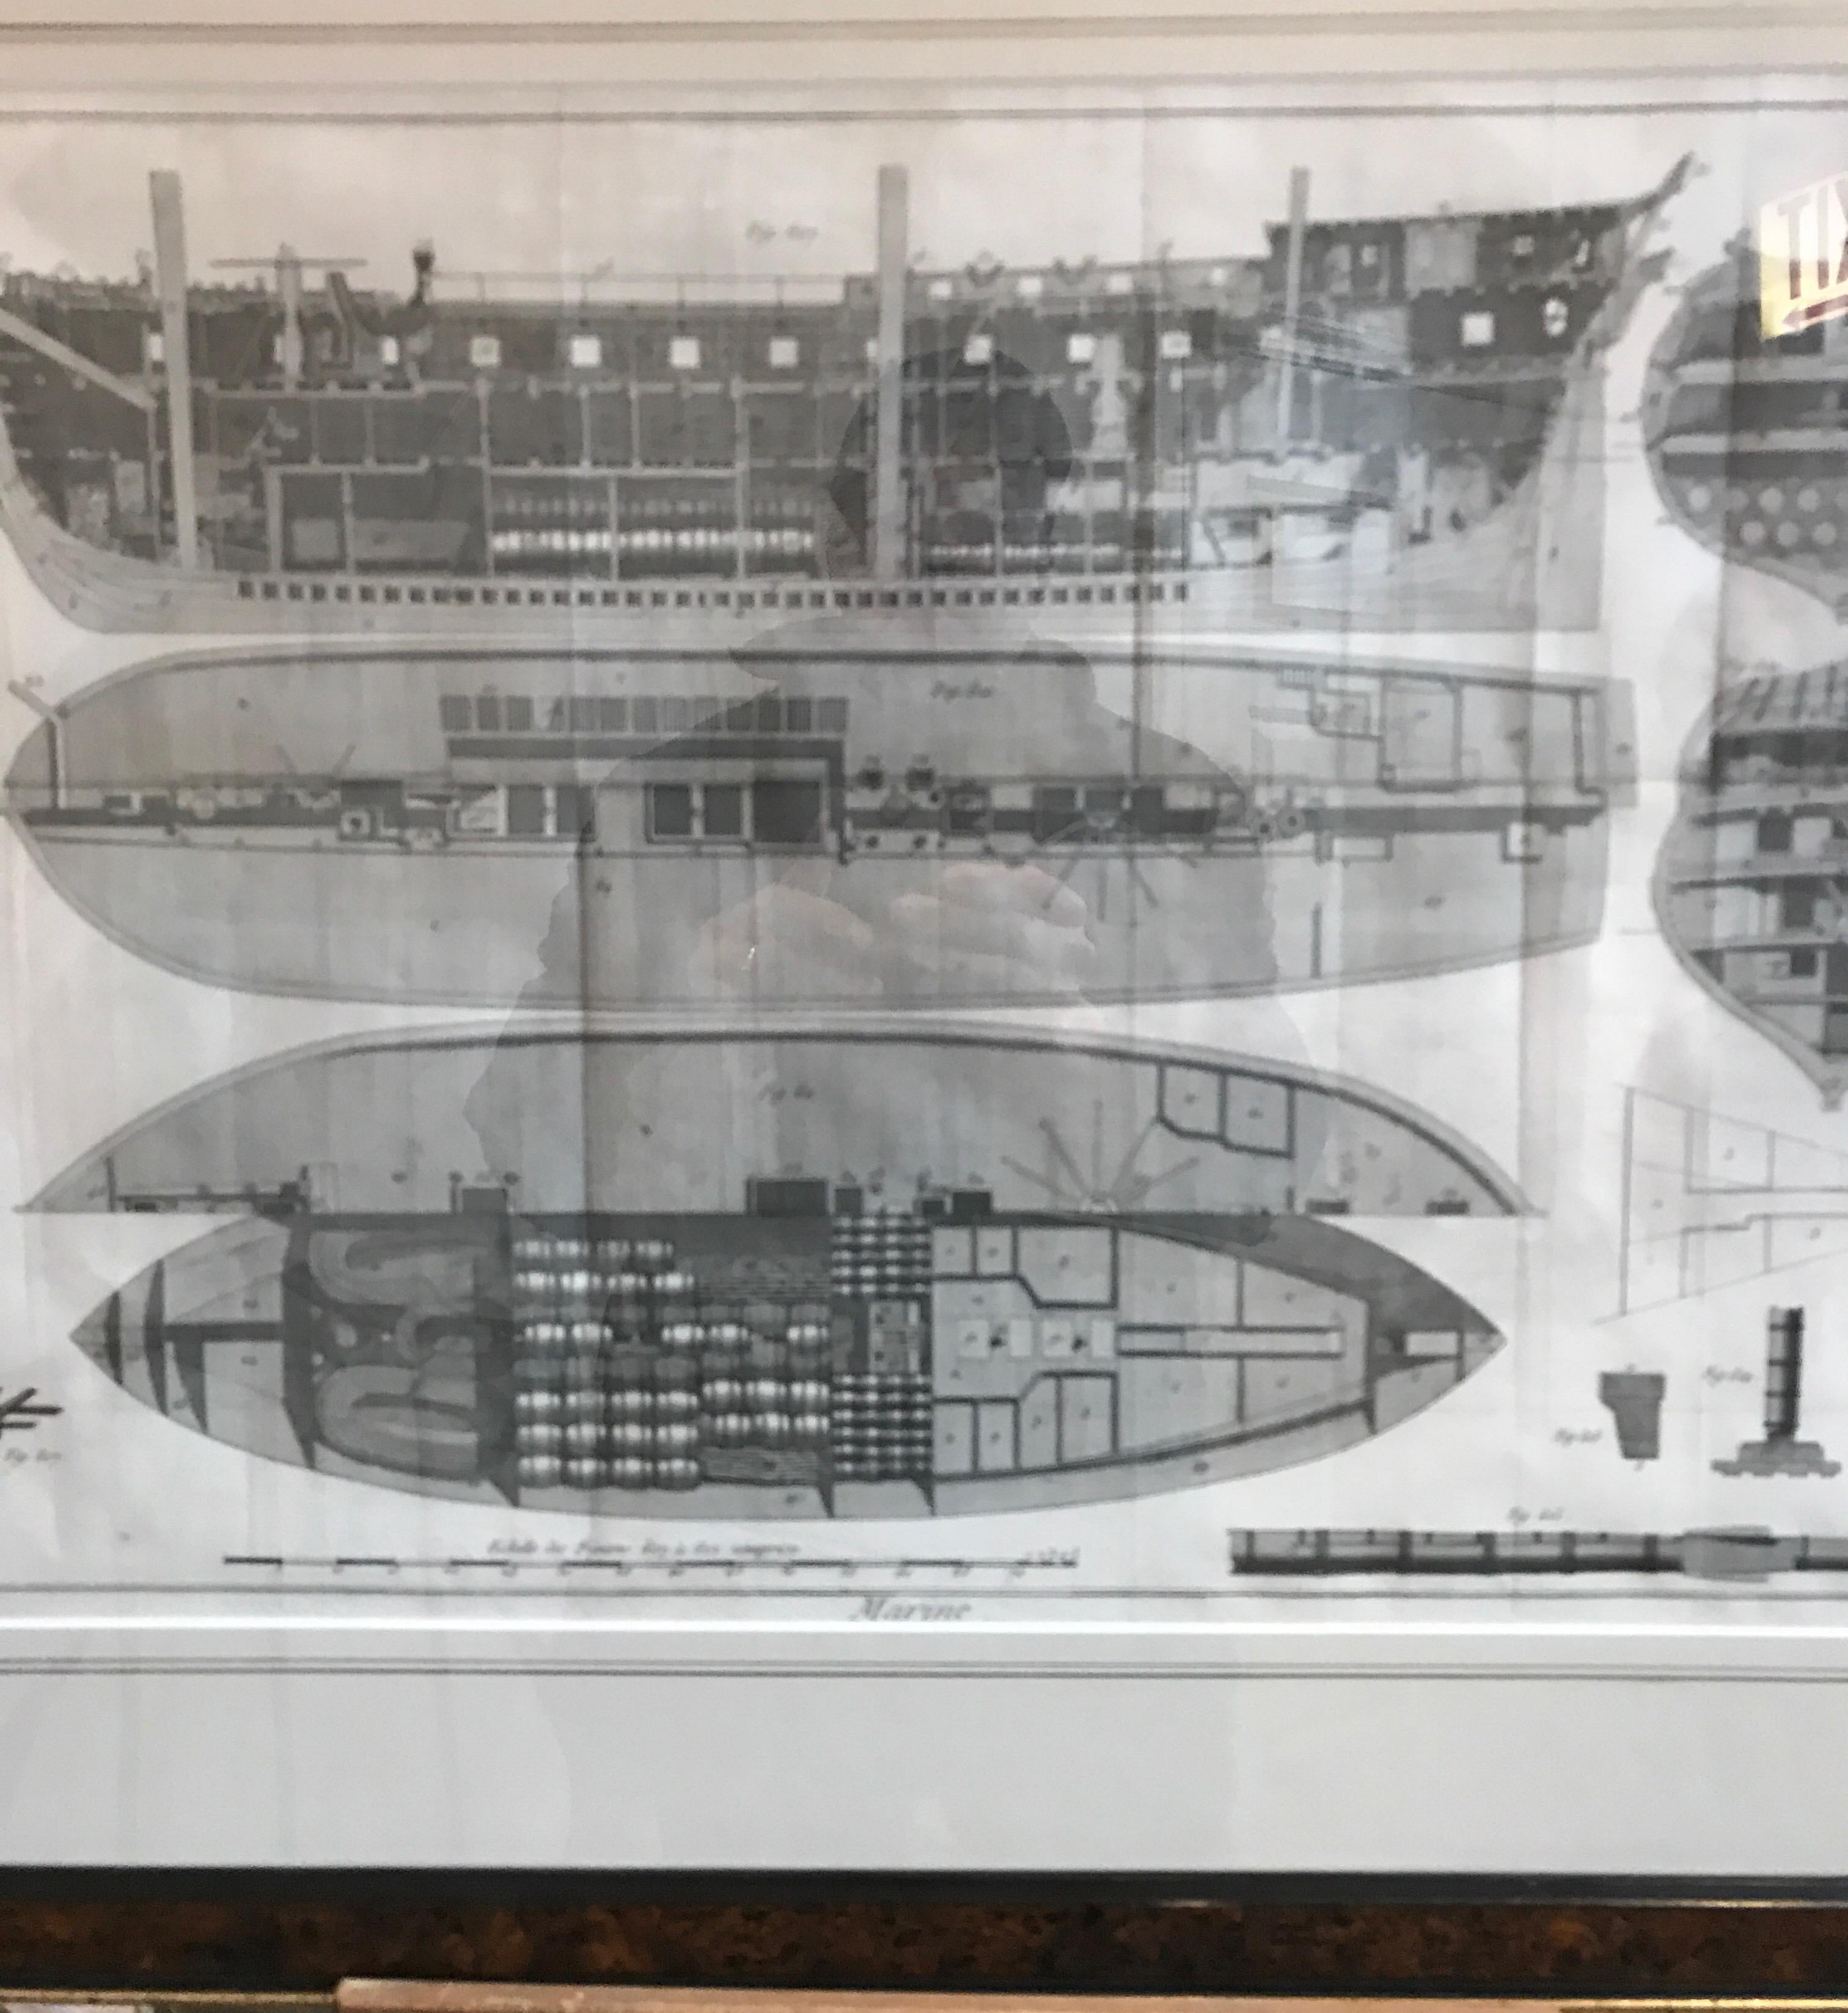 18th century engraving of Marine Ships from the Panckouke Encyclopedie.
The work was published by the Parisian bookseller Charles-Josheph Panckouke.
It features all phases of shipbuilding.